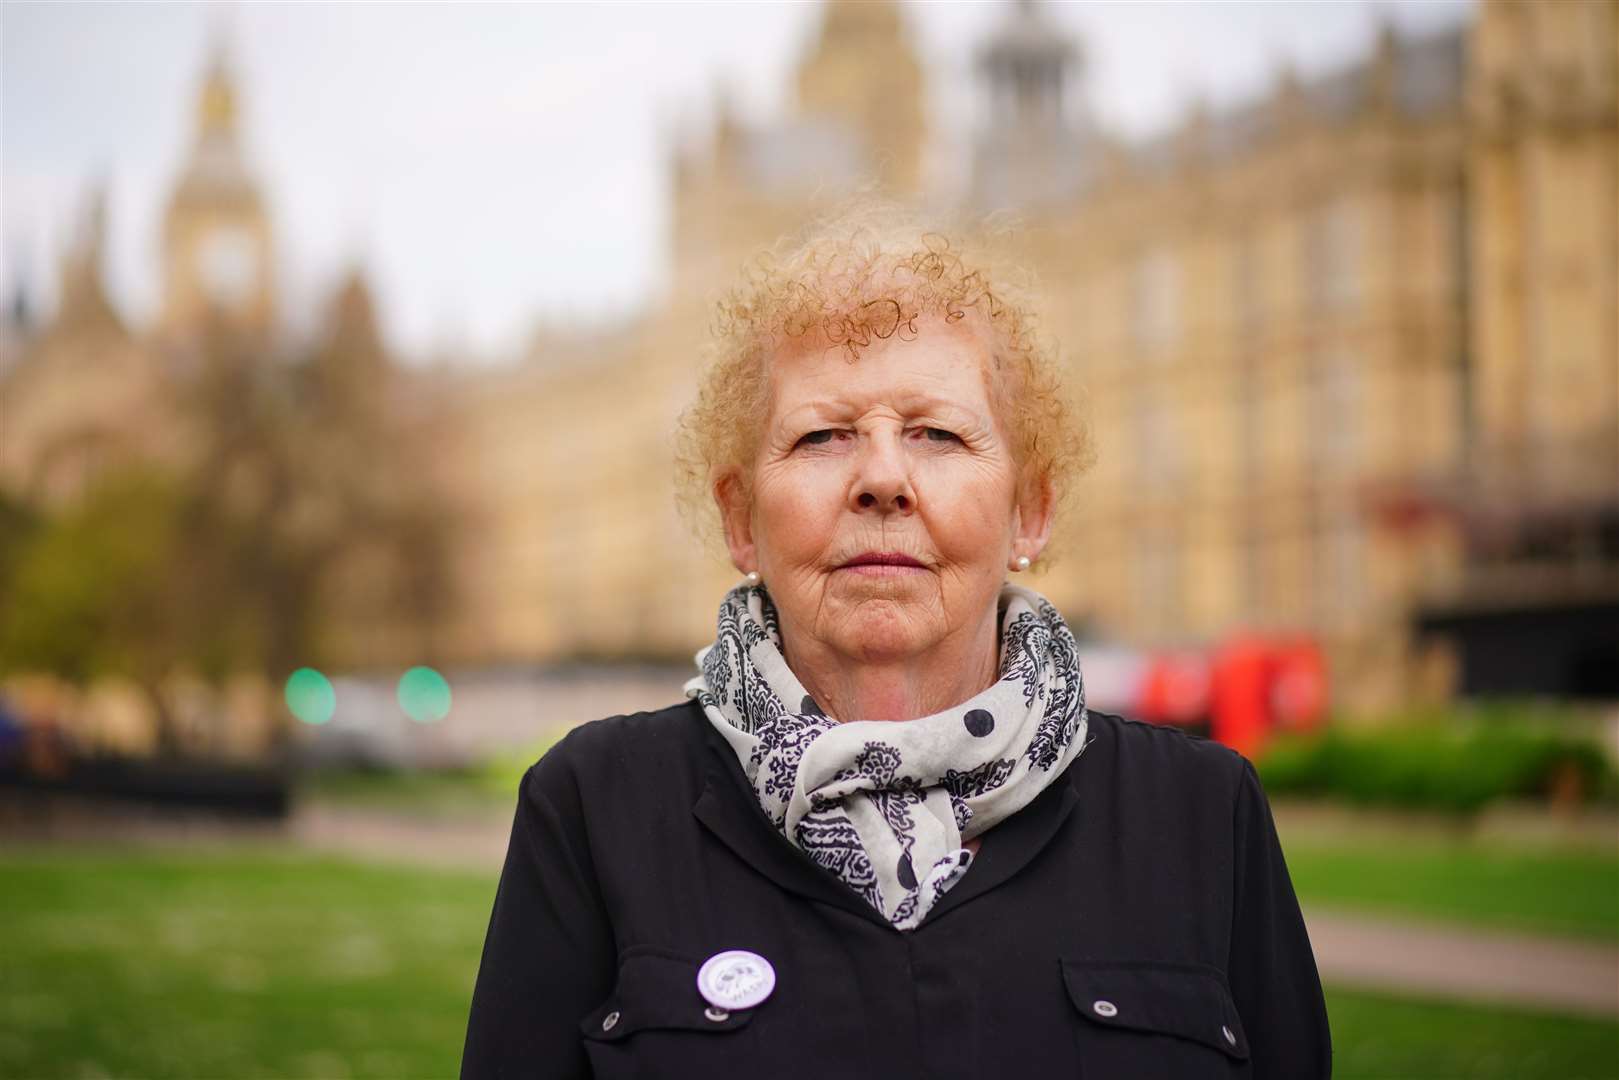 Waspi chairwoman Angela Madden said Parliament can only determine the compensation package if the Government makes time for the necessary debates and votes in the Commons (Victoria Jones/PA)